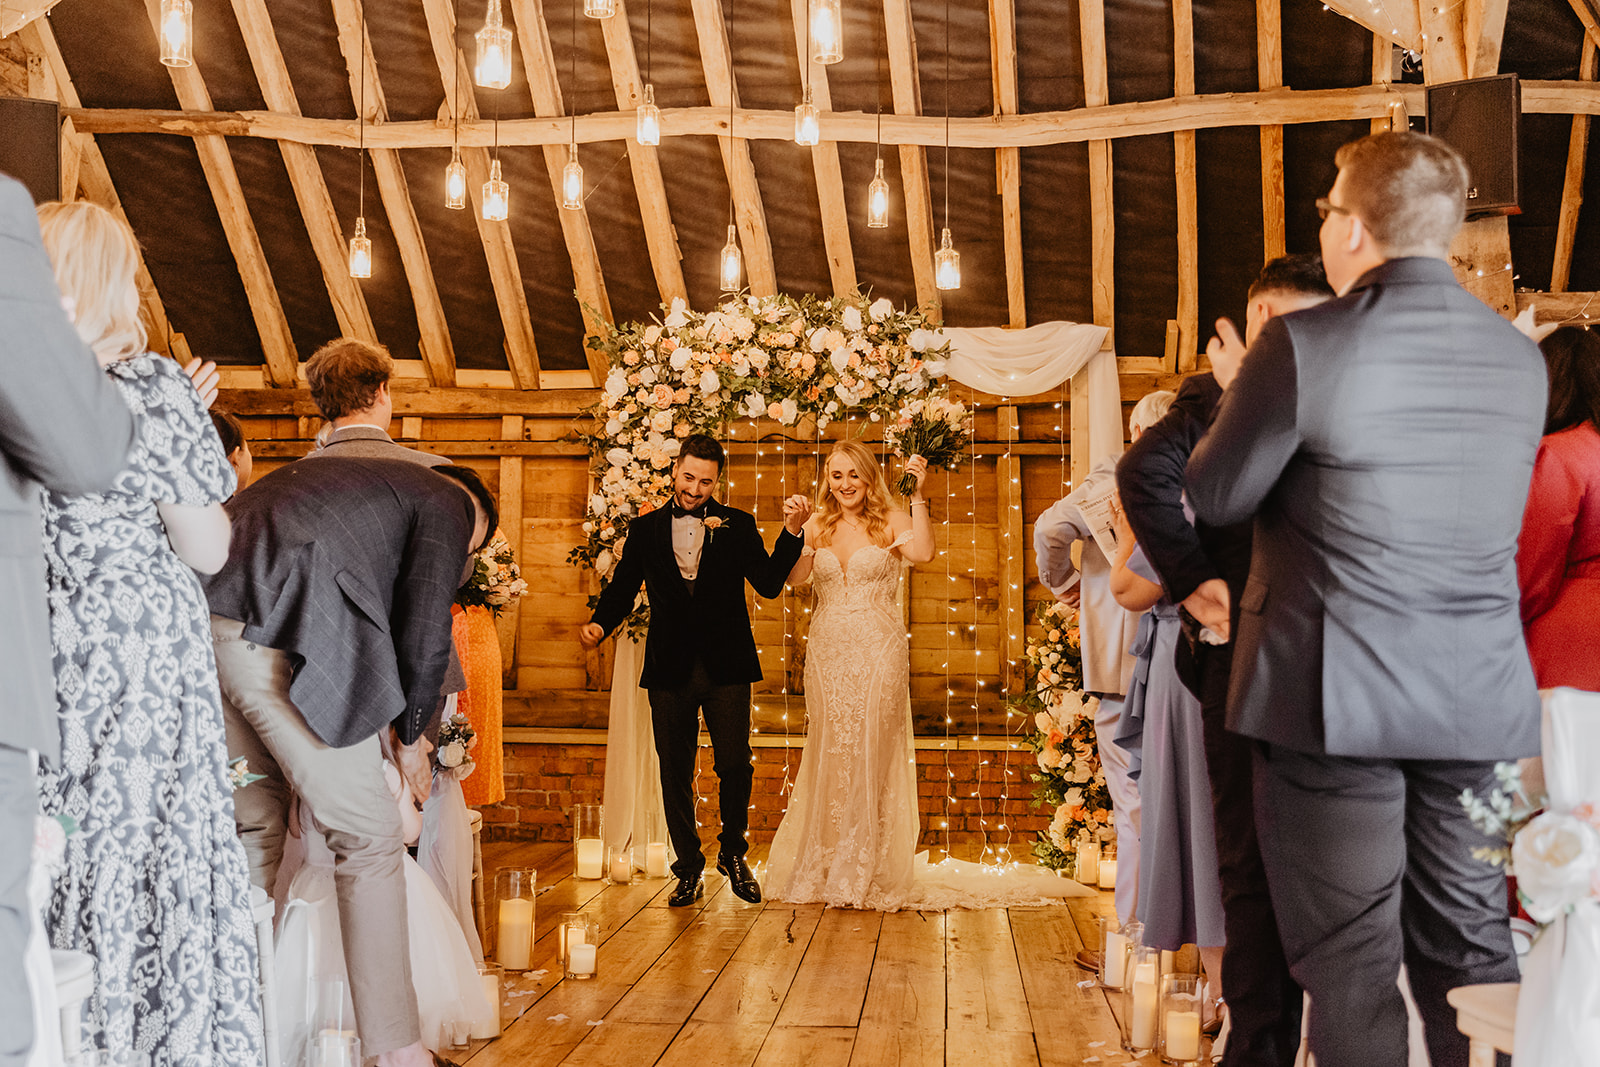 Bride and groom walk down the aisle at a Southlands barn wedding, Sussex. Photo by OliveJoy Photography.